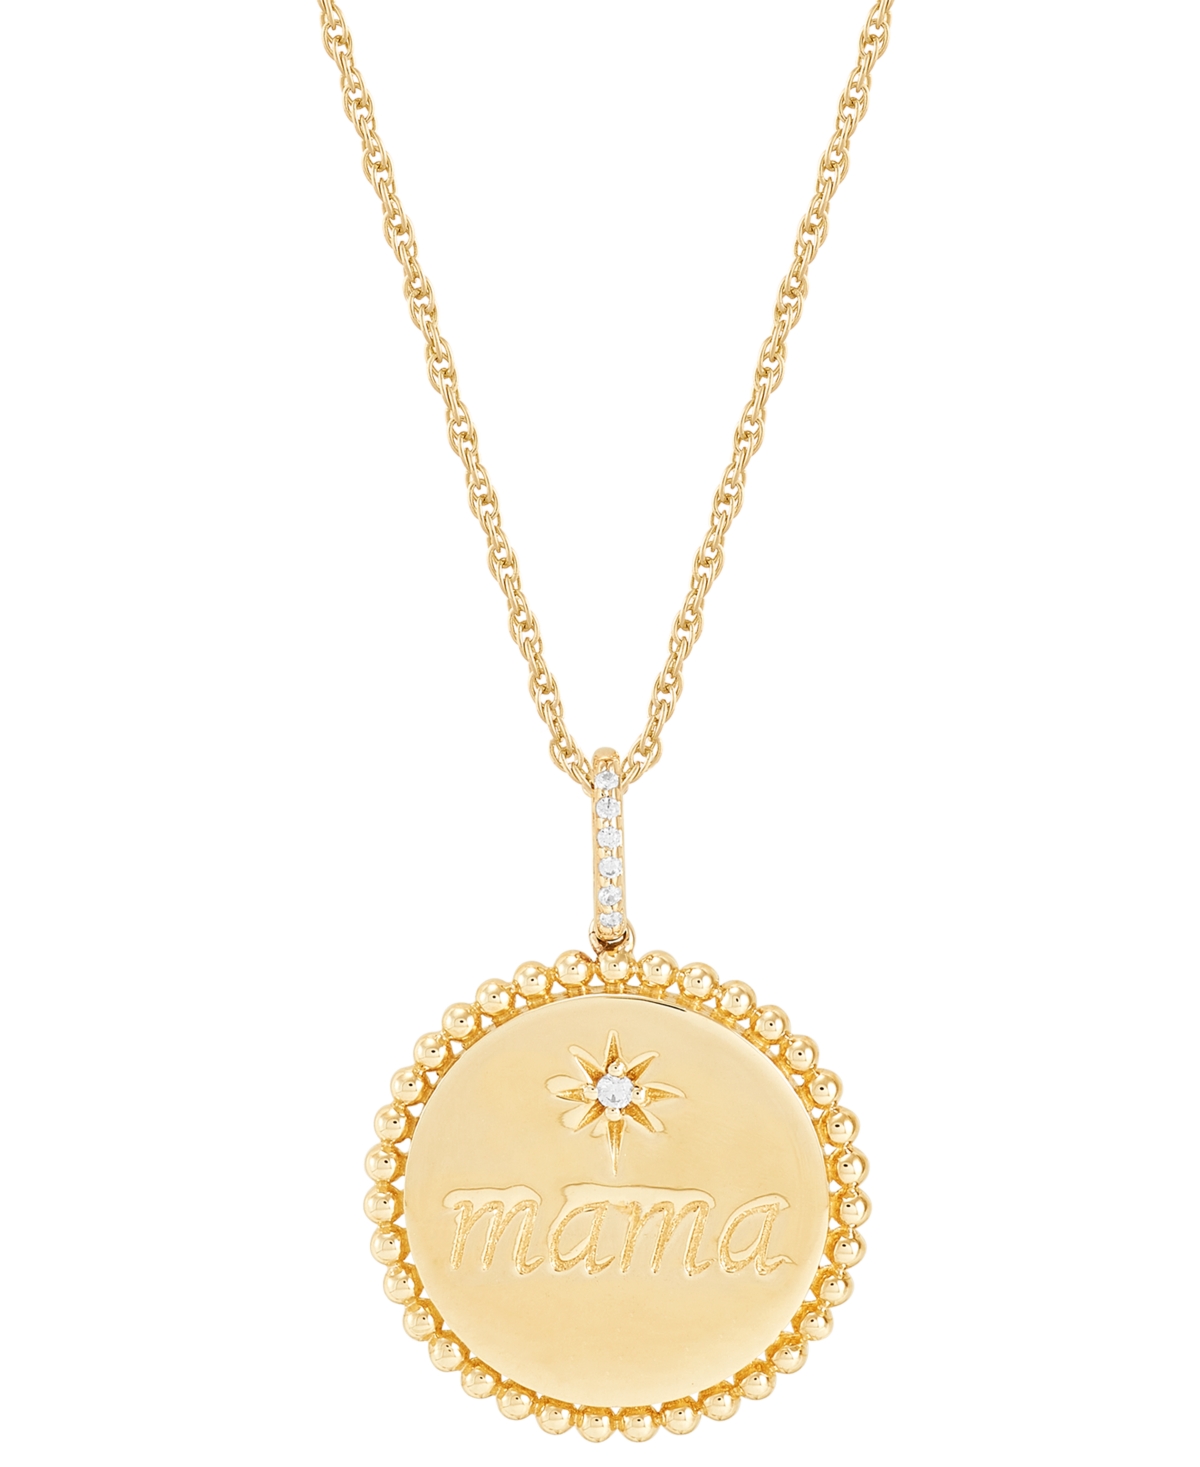 Diamond Accent Mama Disc Pendant Necklace in Sterling Silver or 14k Gold-Plated Sterling Silver, 16" + 2" extender - Gold-Plated Sterling Silver